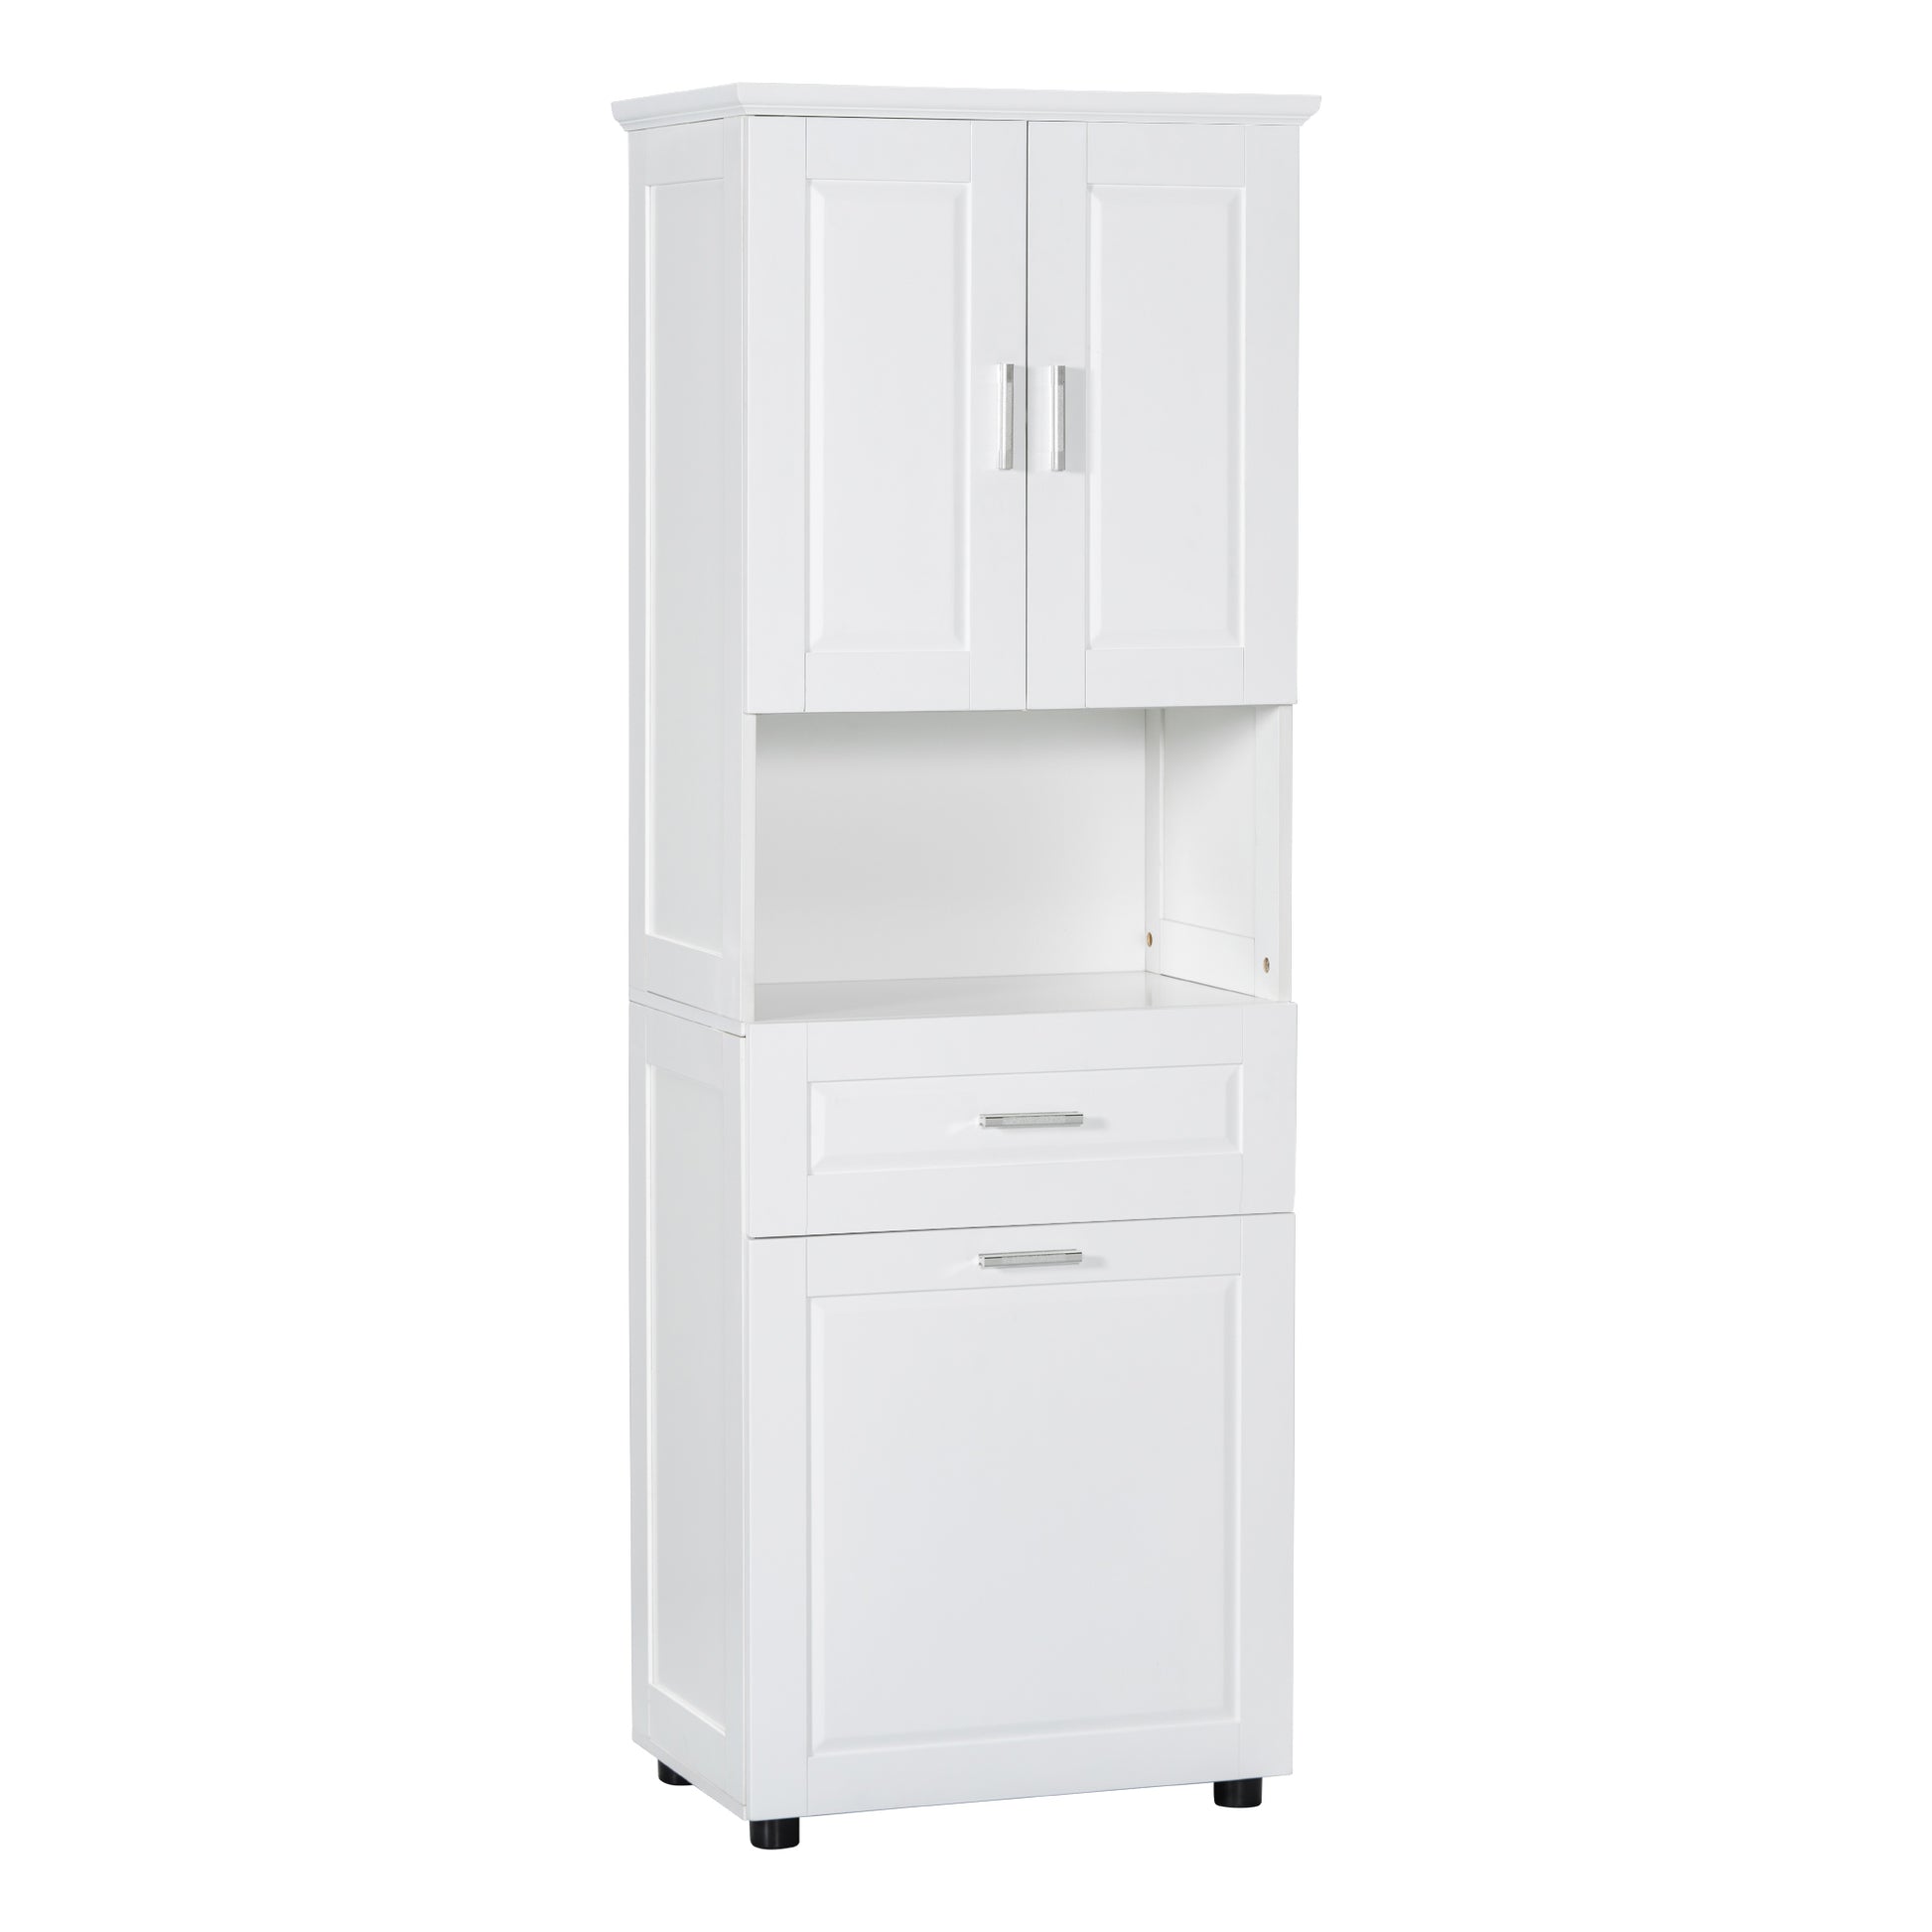 Tall Bathroom Cabinet With Laundry Basket, Large